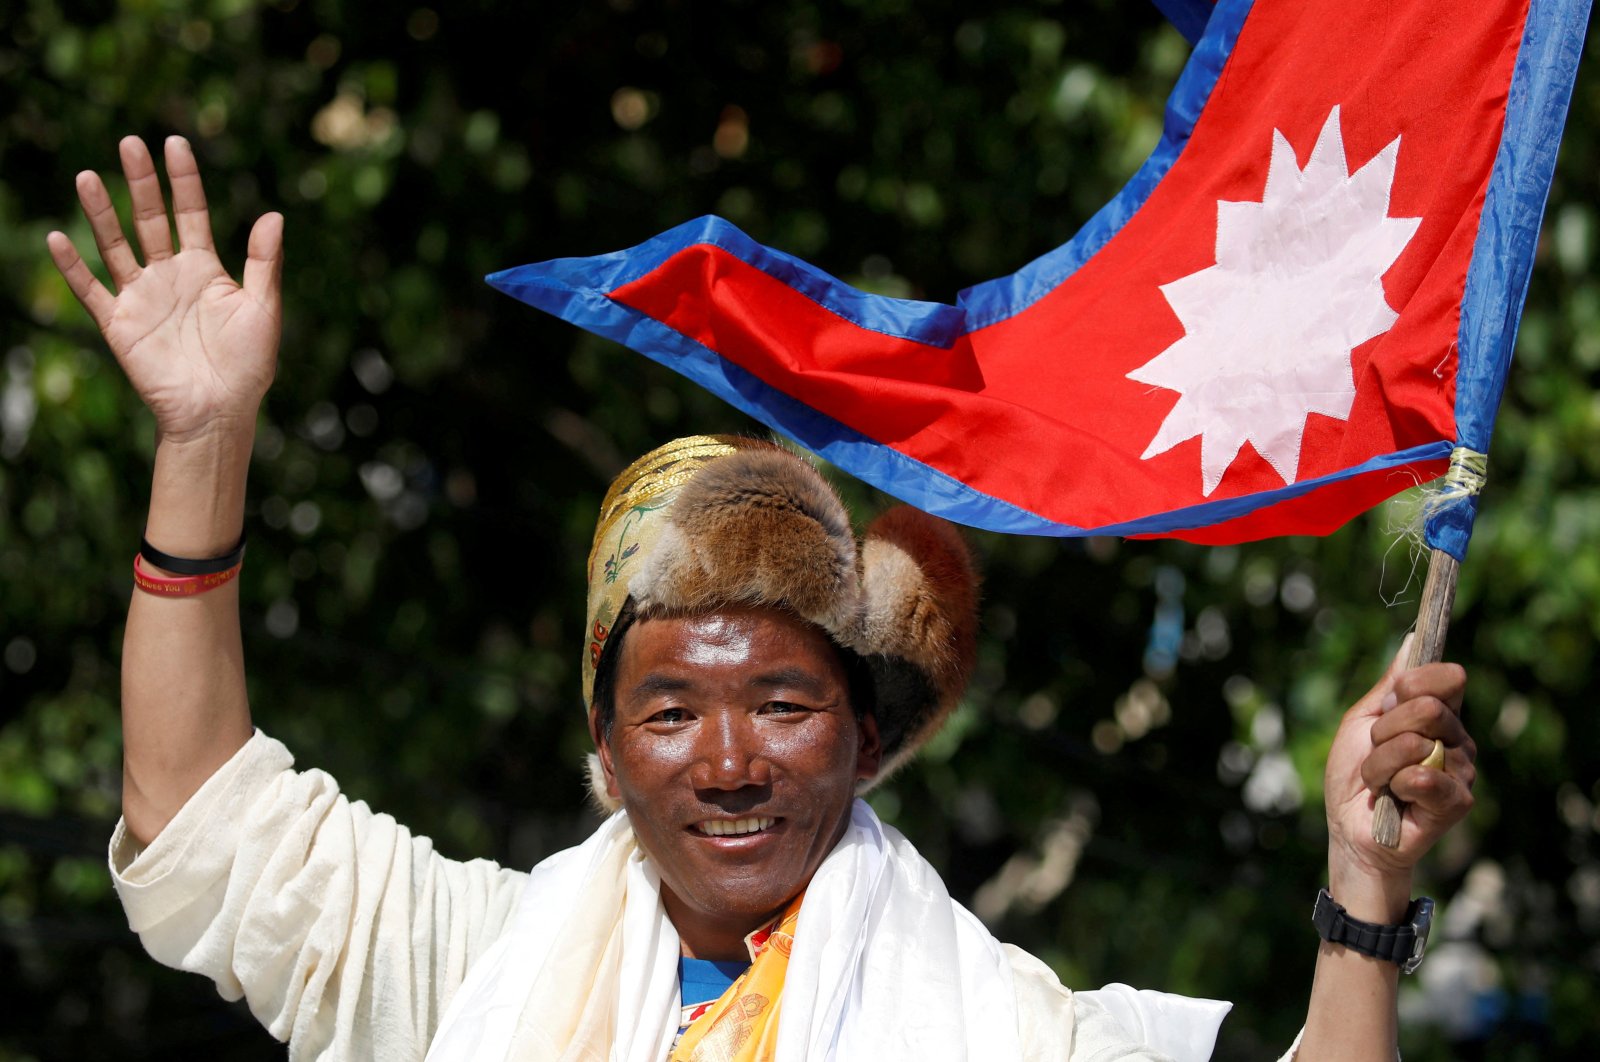 Nepali mountaineer Kami Rita Sherpa waves upon his arrival after climbing Mount Everest for the 24th time in 2019, setting a record for the most summits of the world&#039;s highest mountain, Kathmandu, Nepal May 25, 2019. (Reuters Photo)